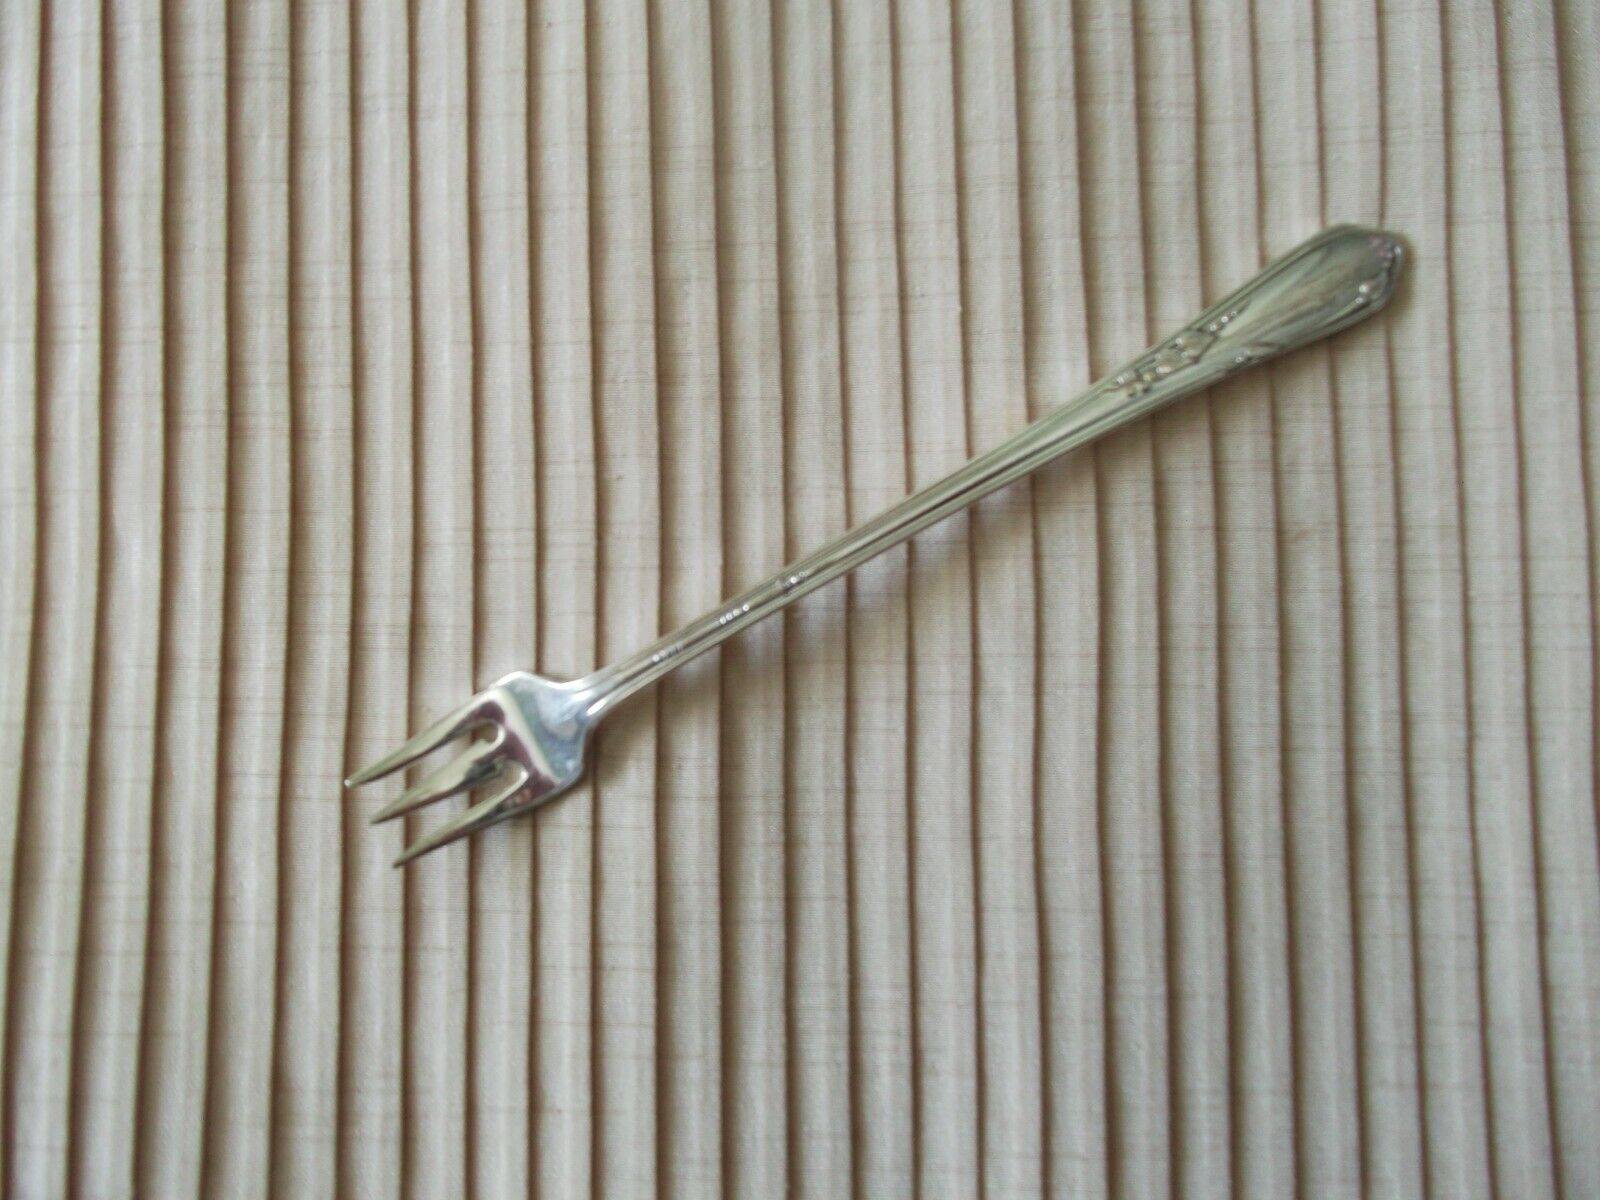 1 Seafood/Cocktail Fork, Oneida Community Stainless flatware,  "Brahms" pattern